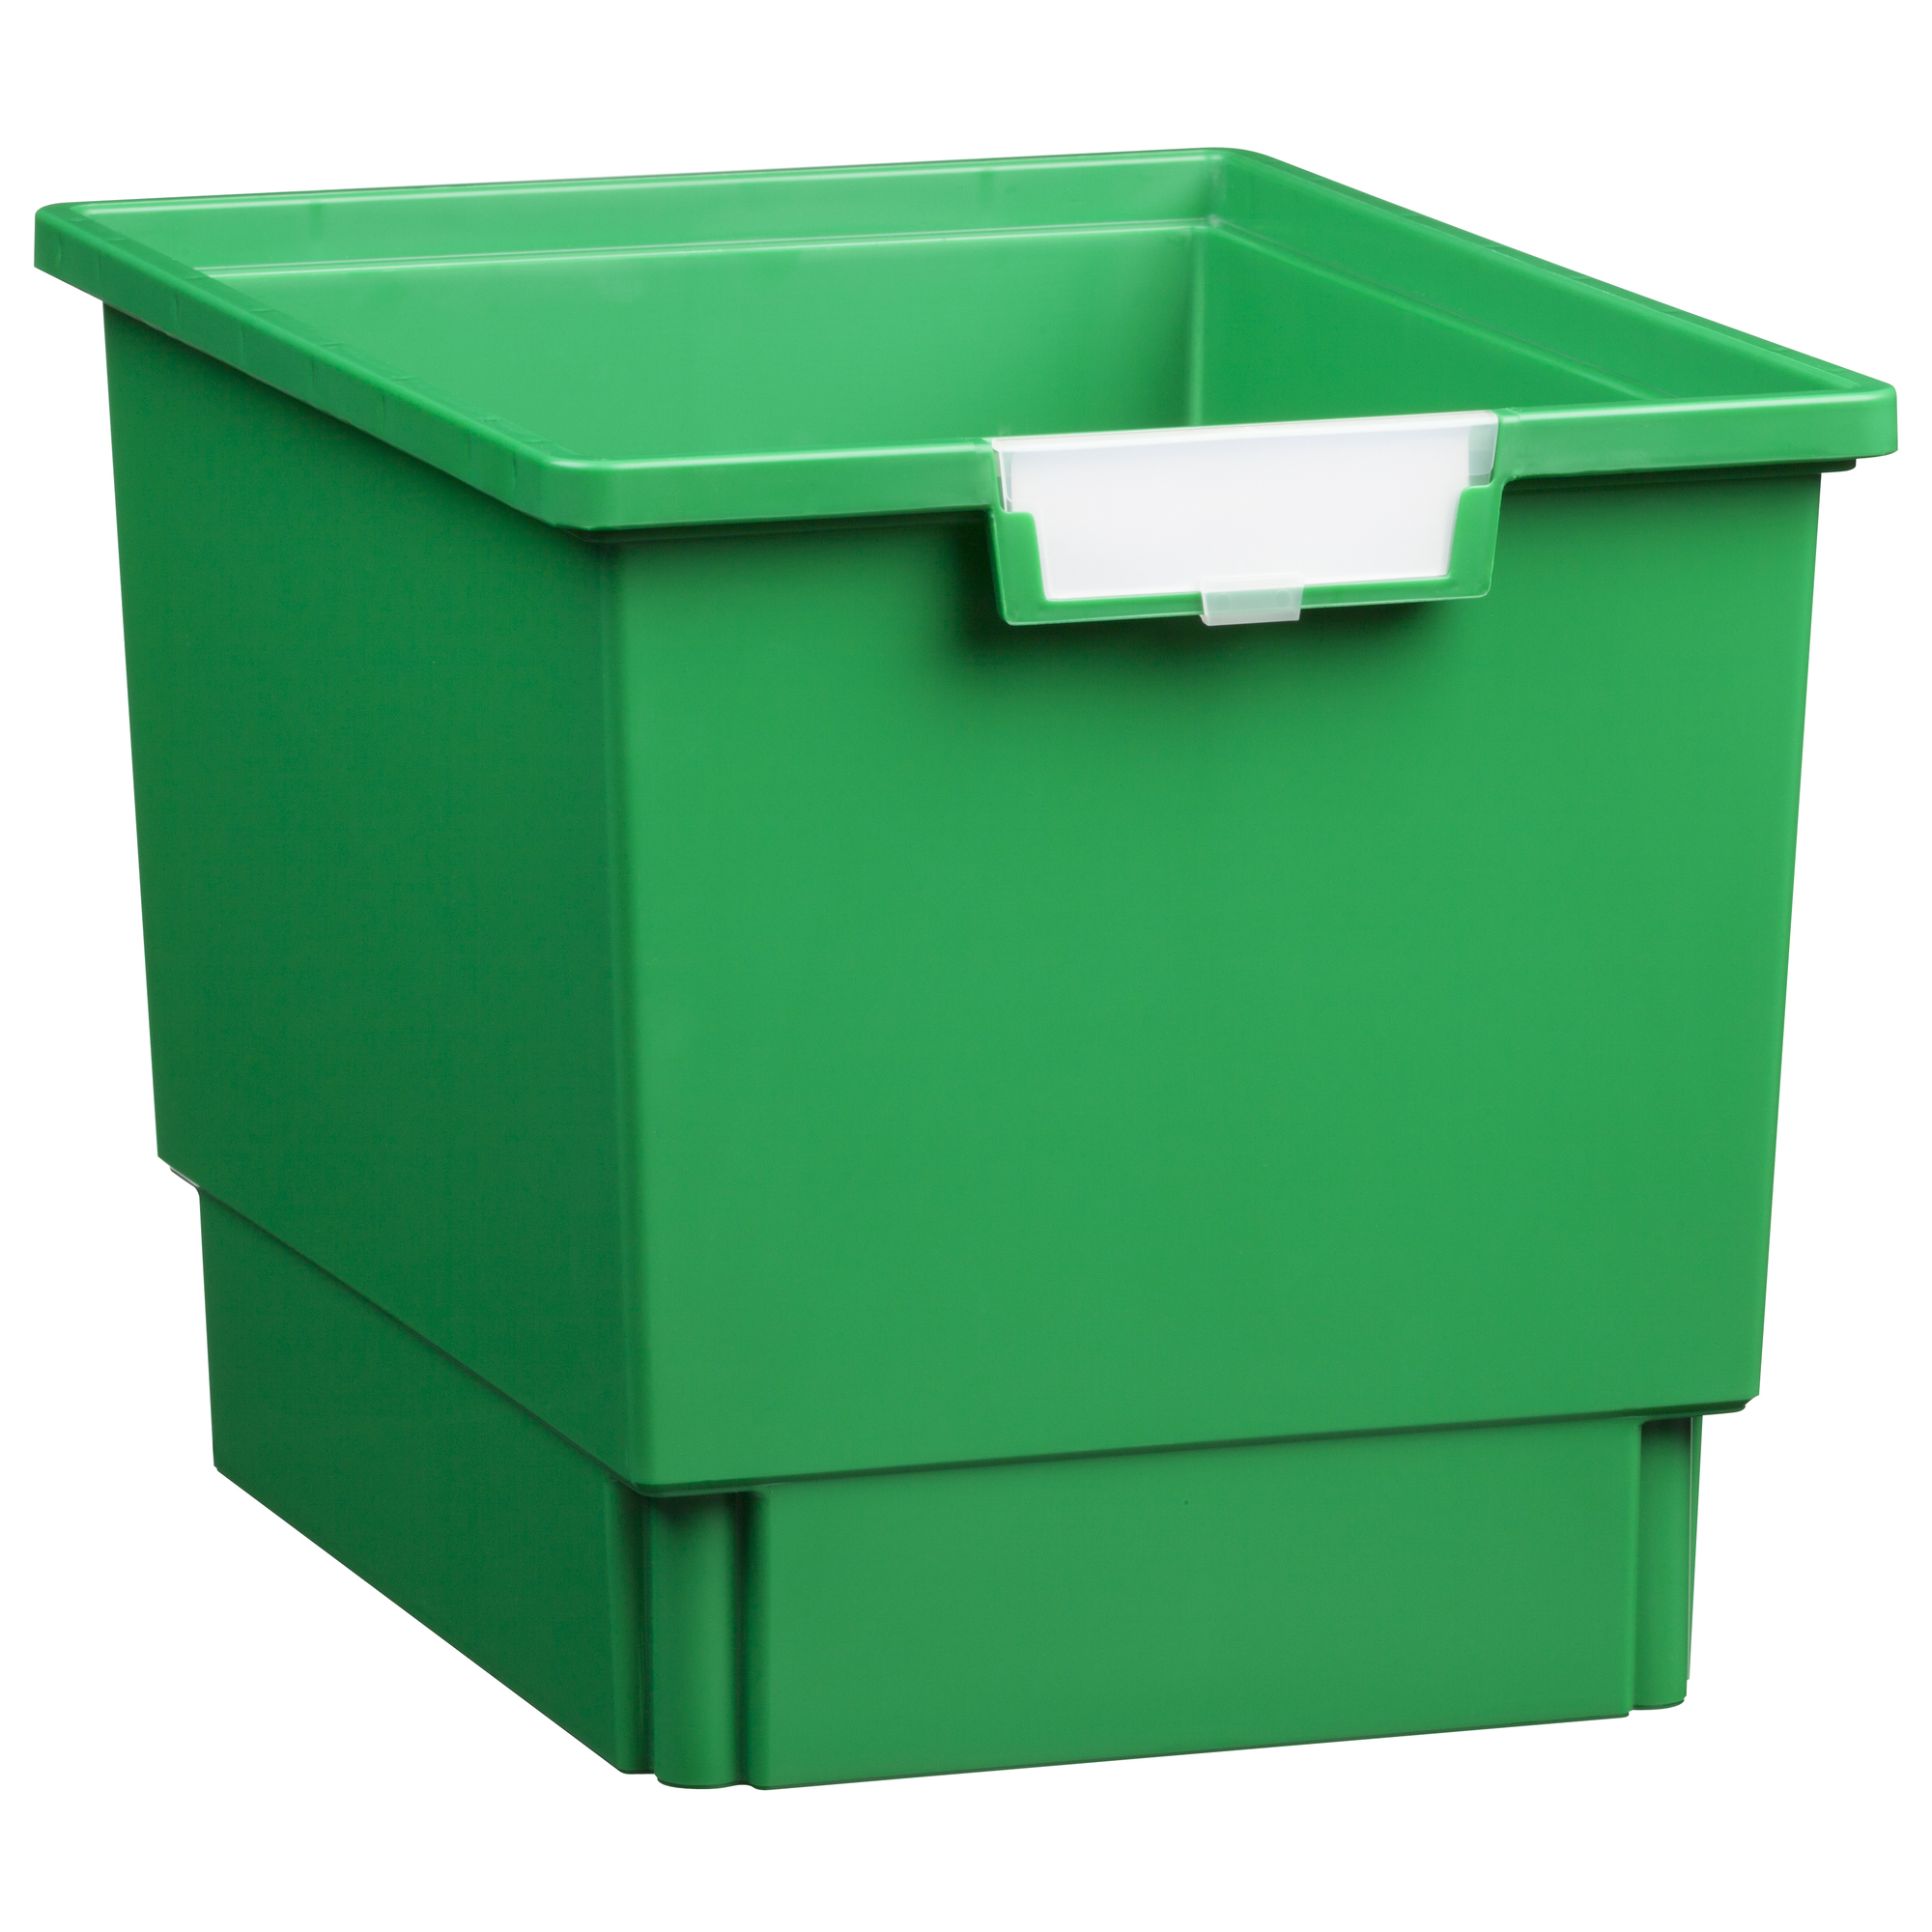 Certwood StorWerks, Slim Line 12Inch Tray in Primary Green-1PK, Included (qty.) 1 Height 12 in, Model CE1954PG1